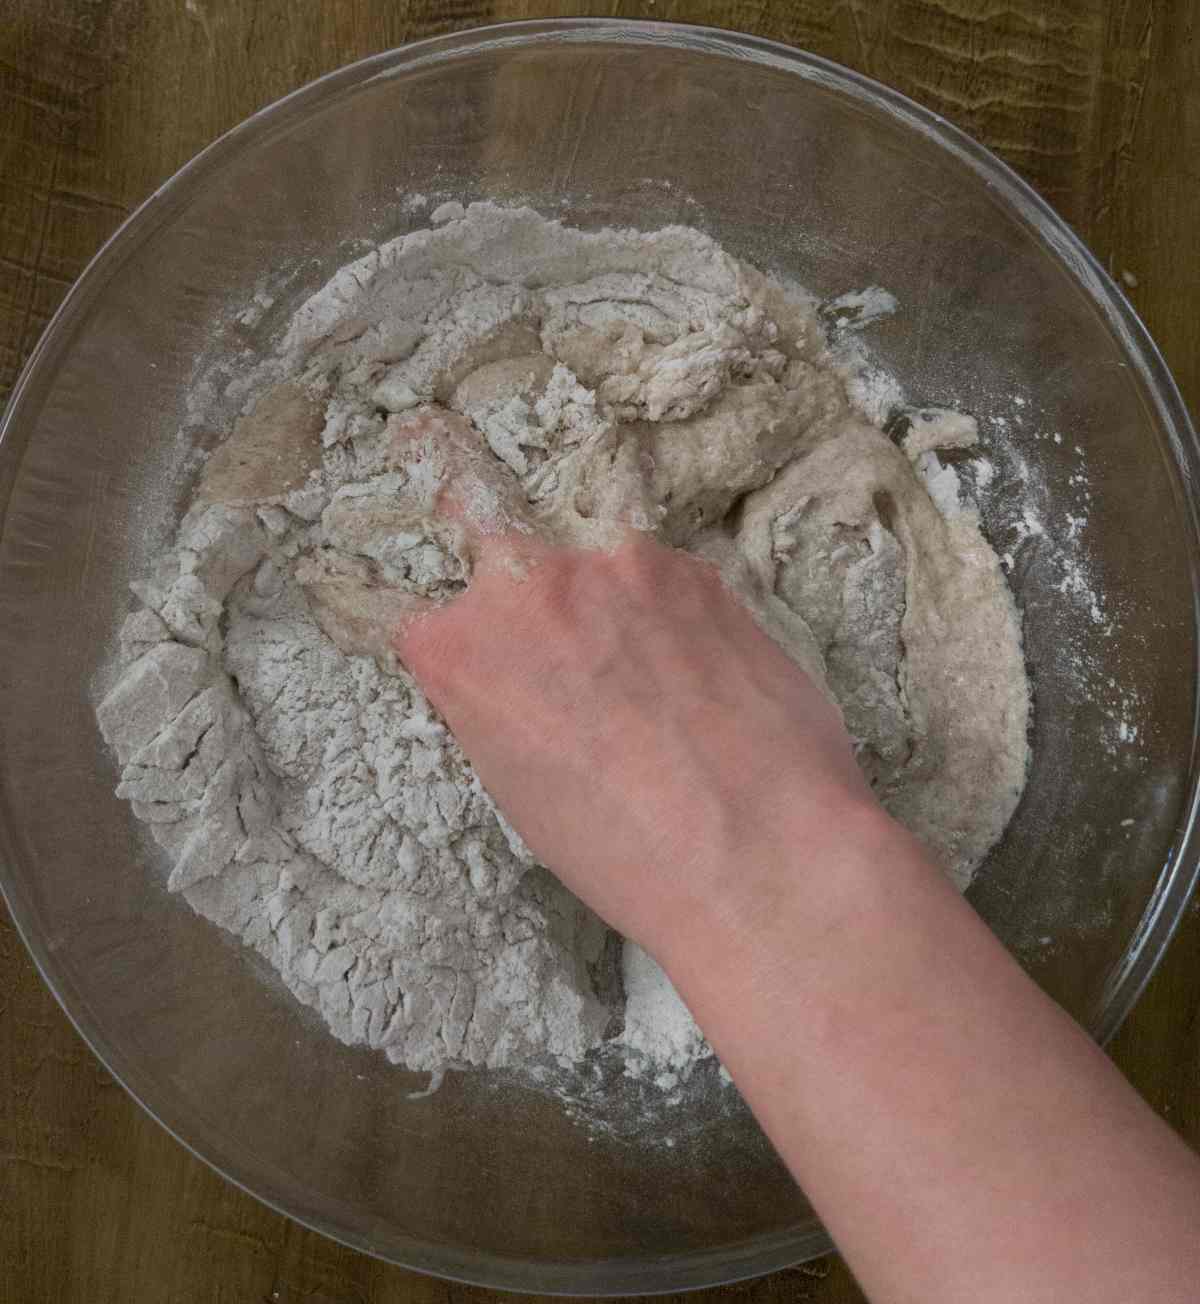 Mixing the dough with a hand.